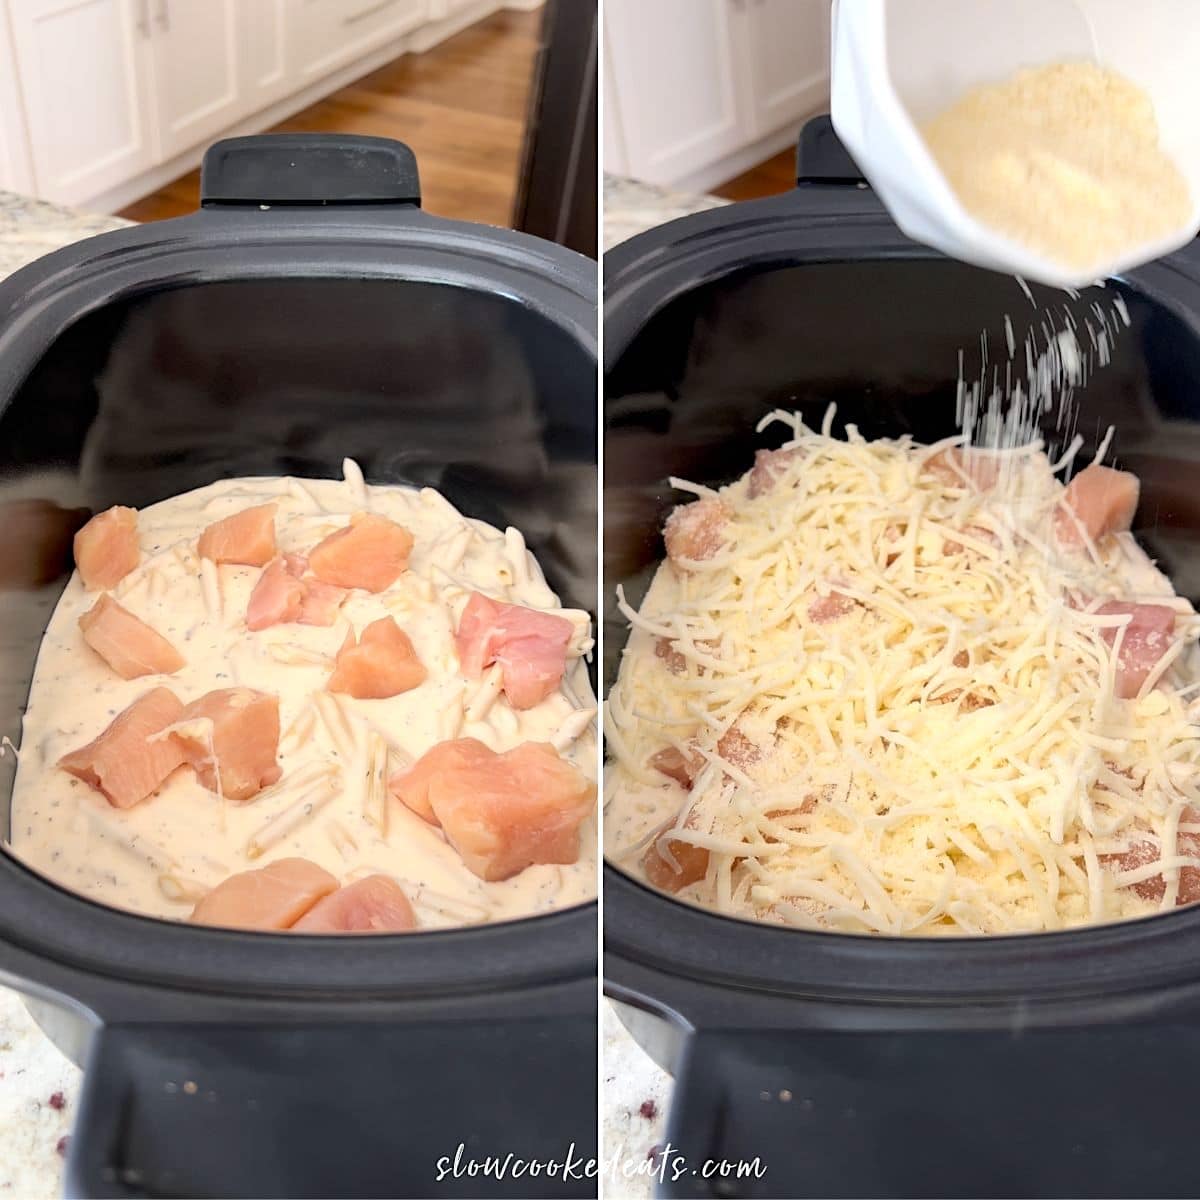 Layering chicken and parmesan cheese in an oval black crock pot to make crockpot chicken alfredo.